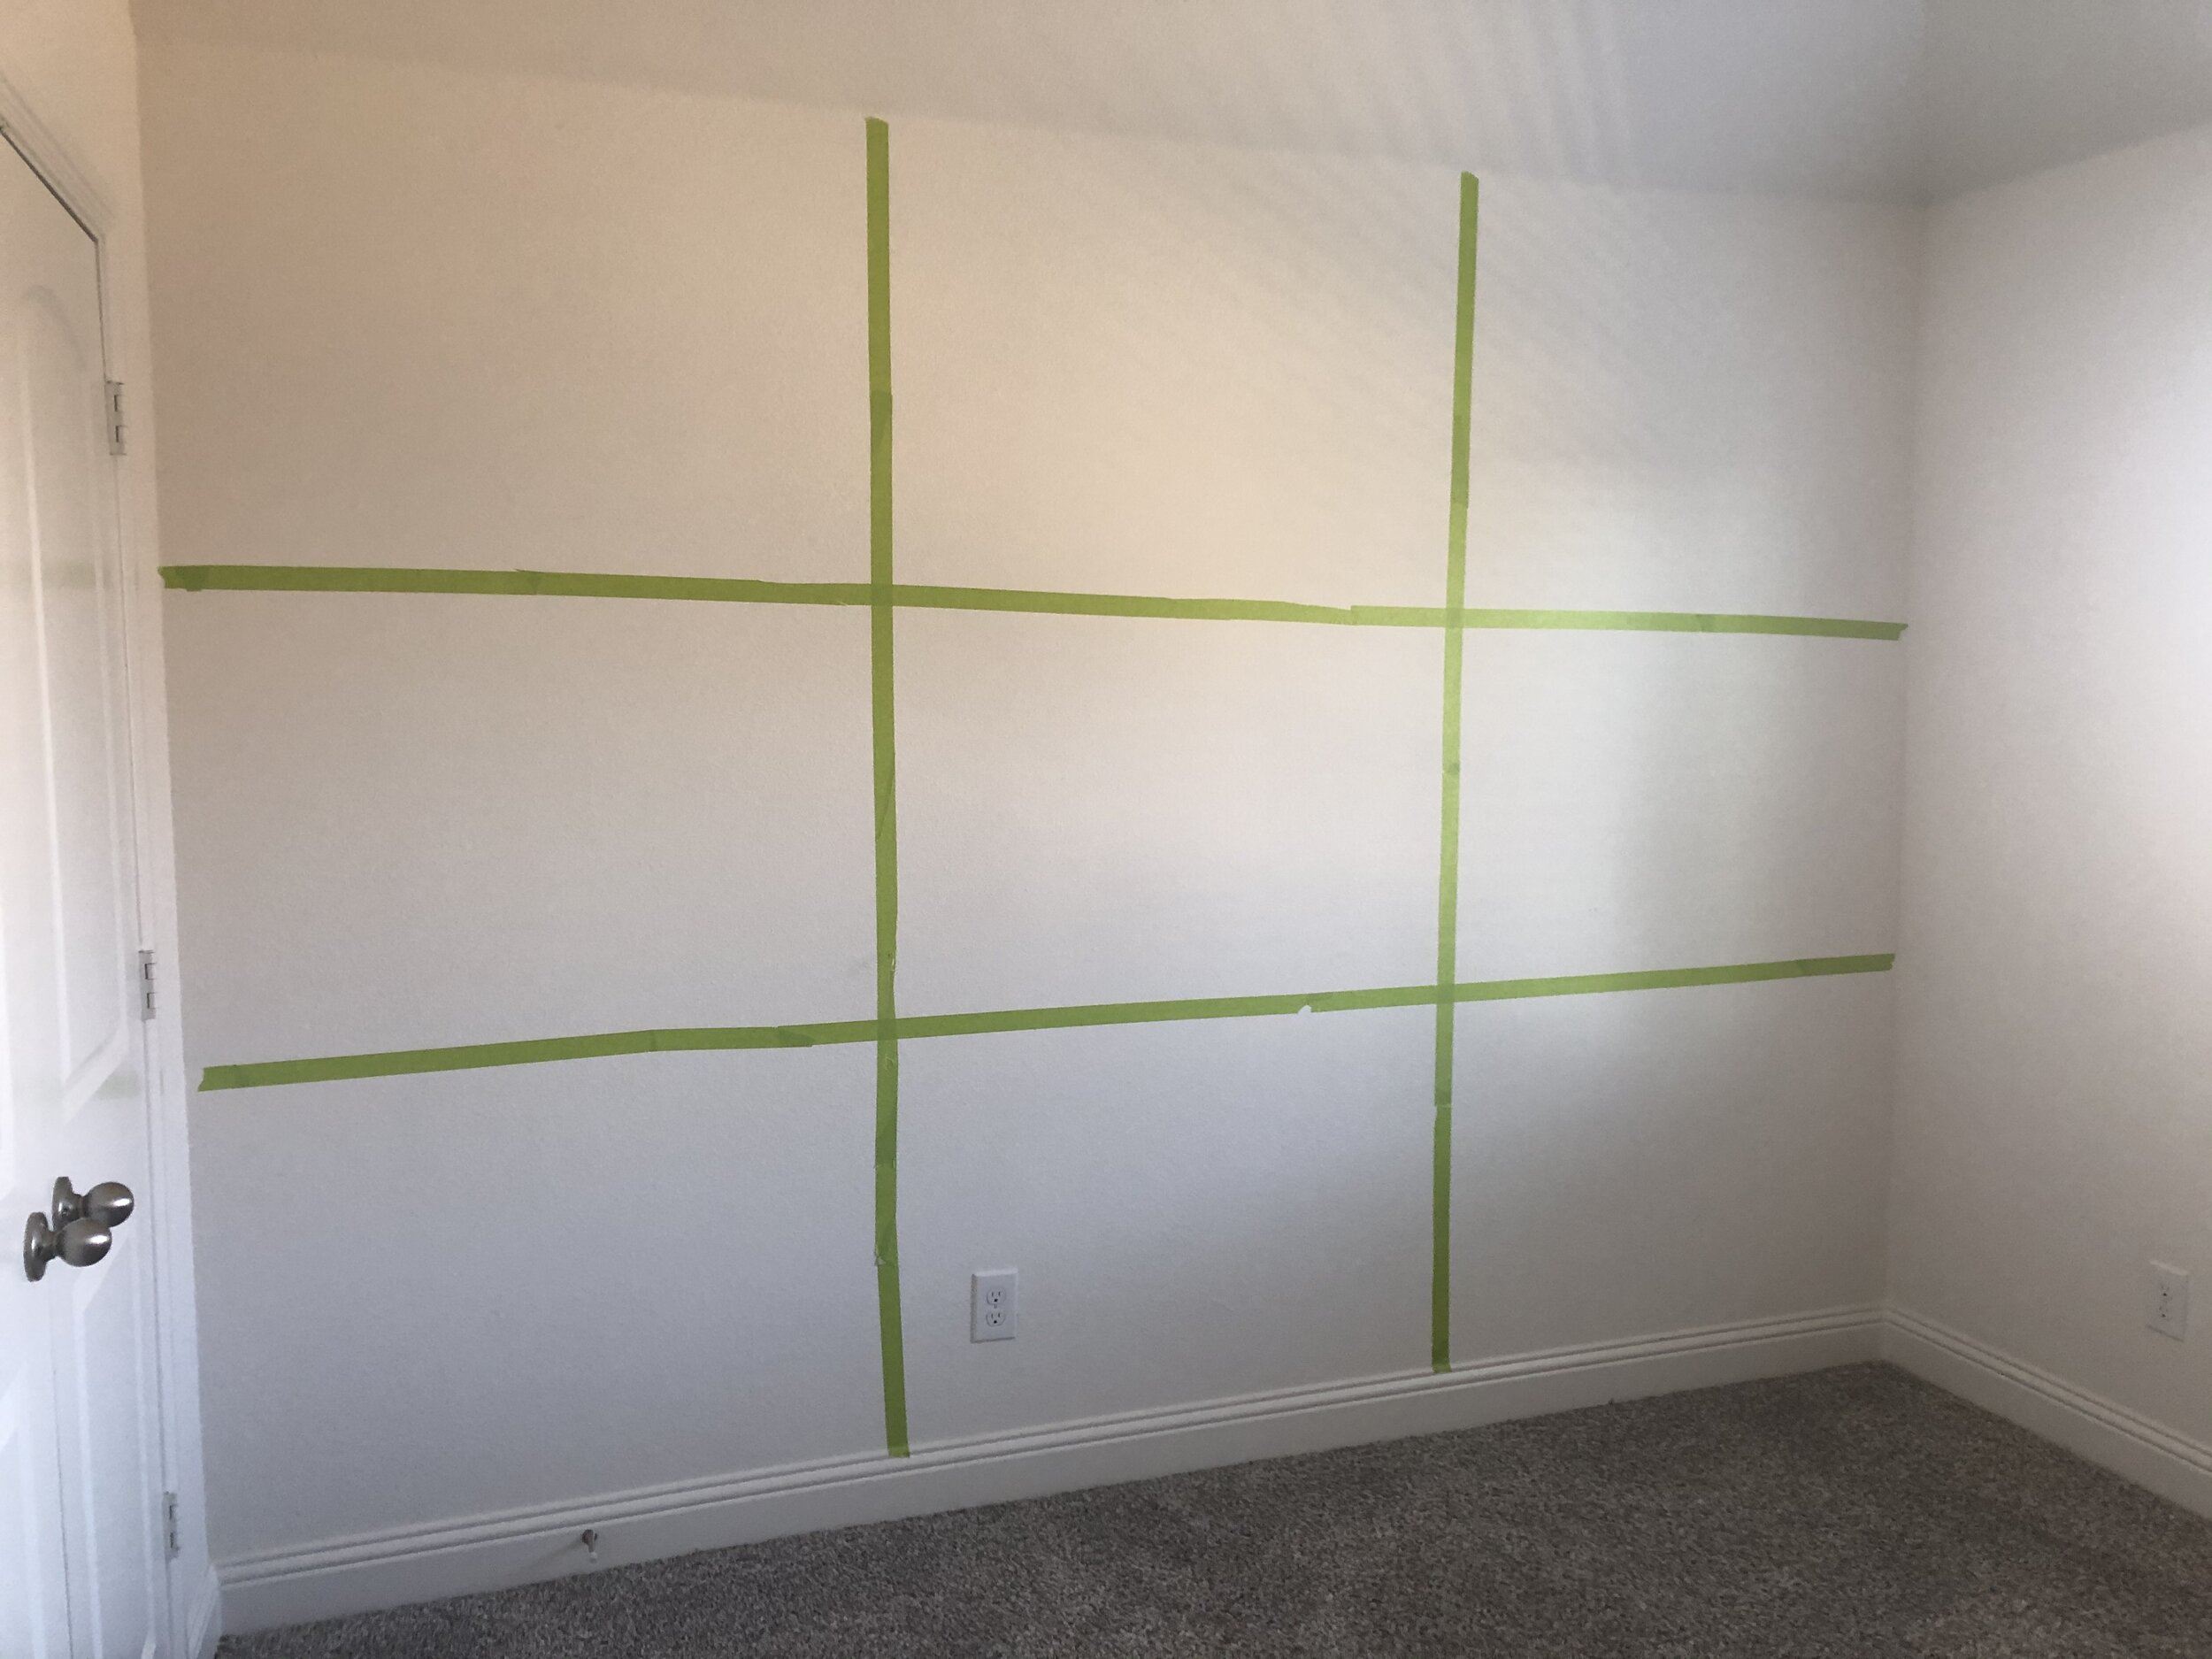 Mapping out the accent wall